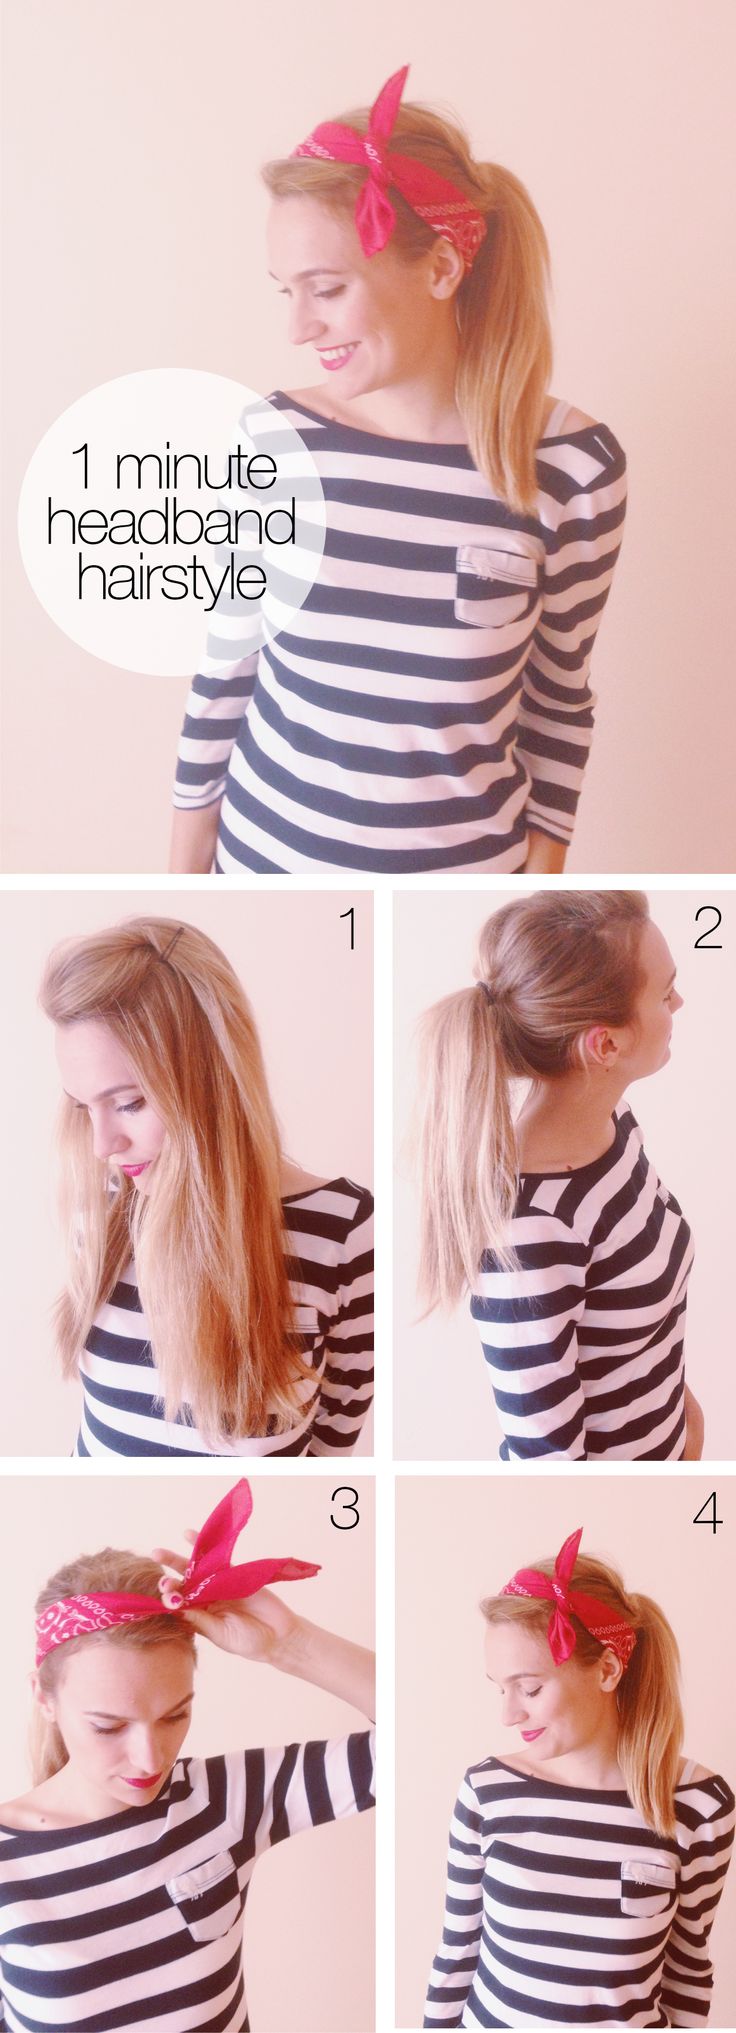 Simple Ponytail Hairstyle with Scarlf Headband Tutorial